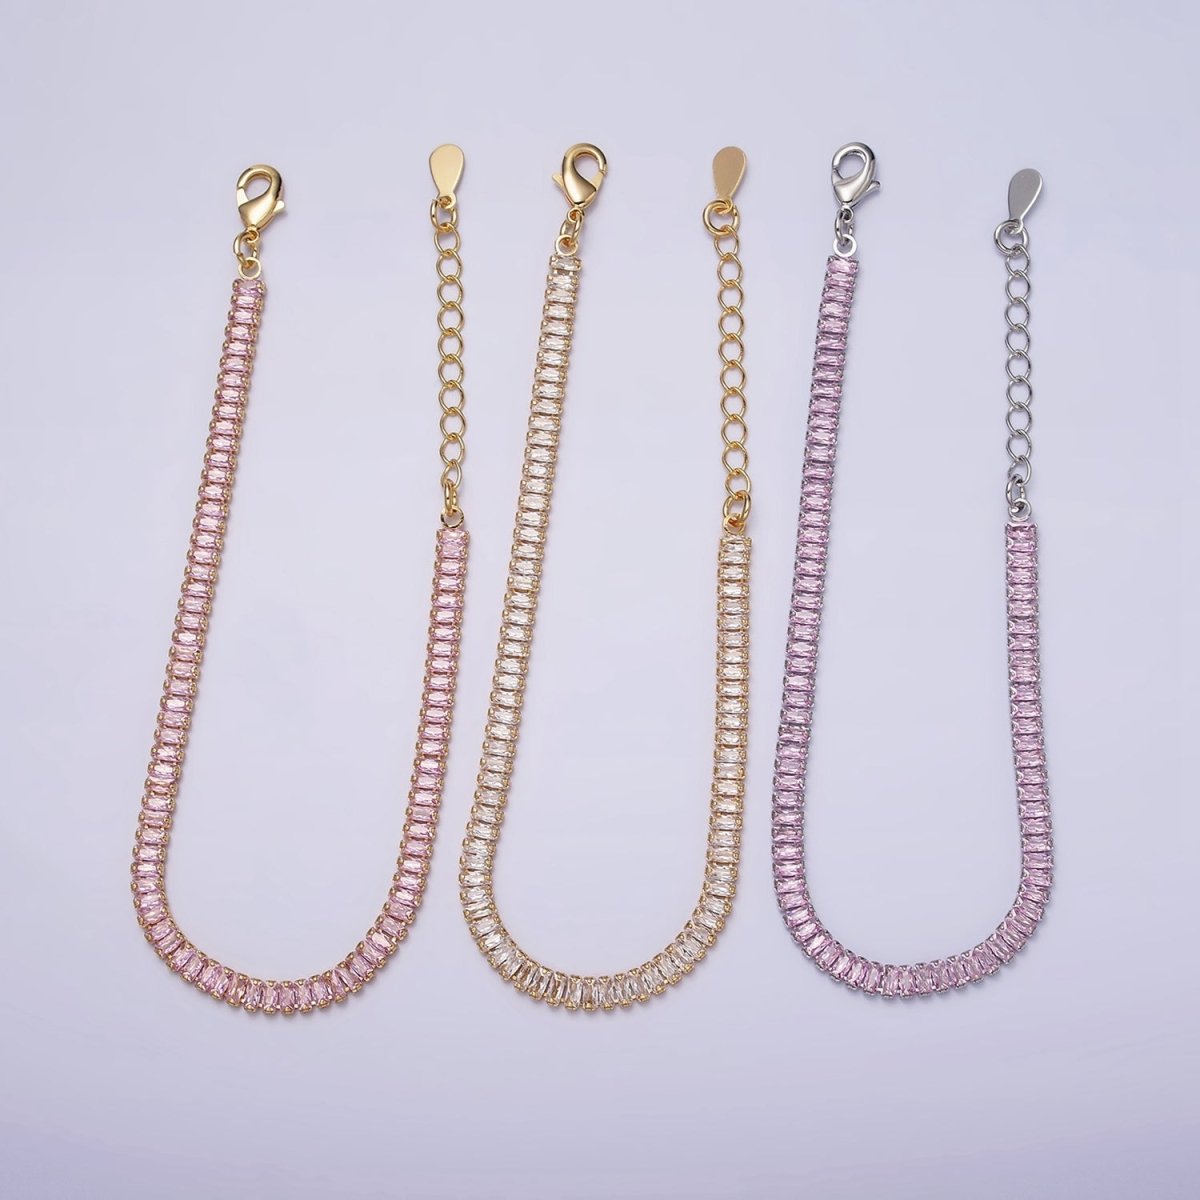 16K Gold Filled Clear, Pink Baguette CZ 3.5mm Tennis Chain 6.5 Inch Bracelet | WA-1820 - WA-1823 Clearance Pricing - DLUXCA